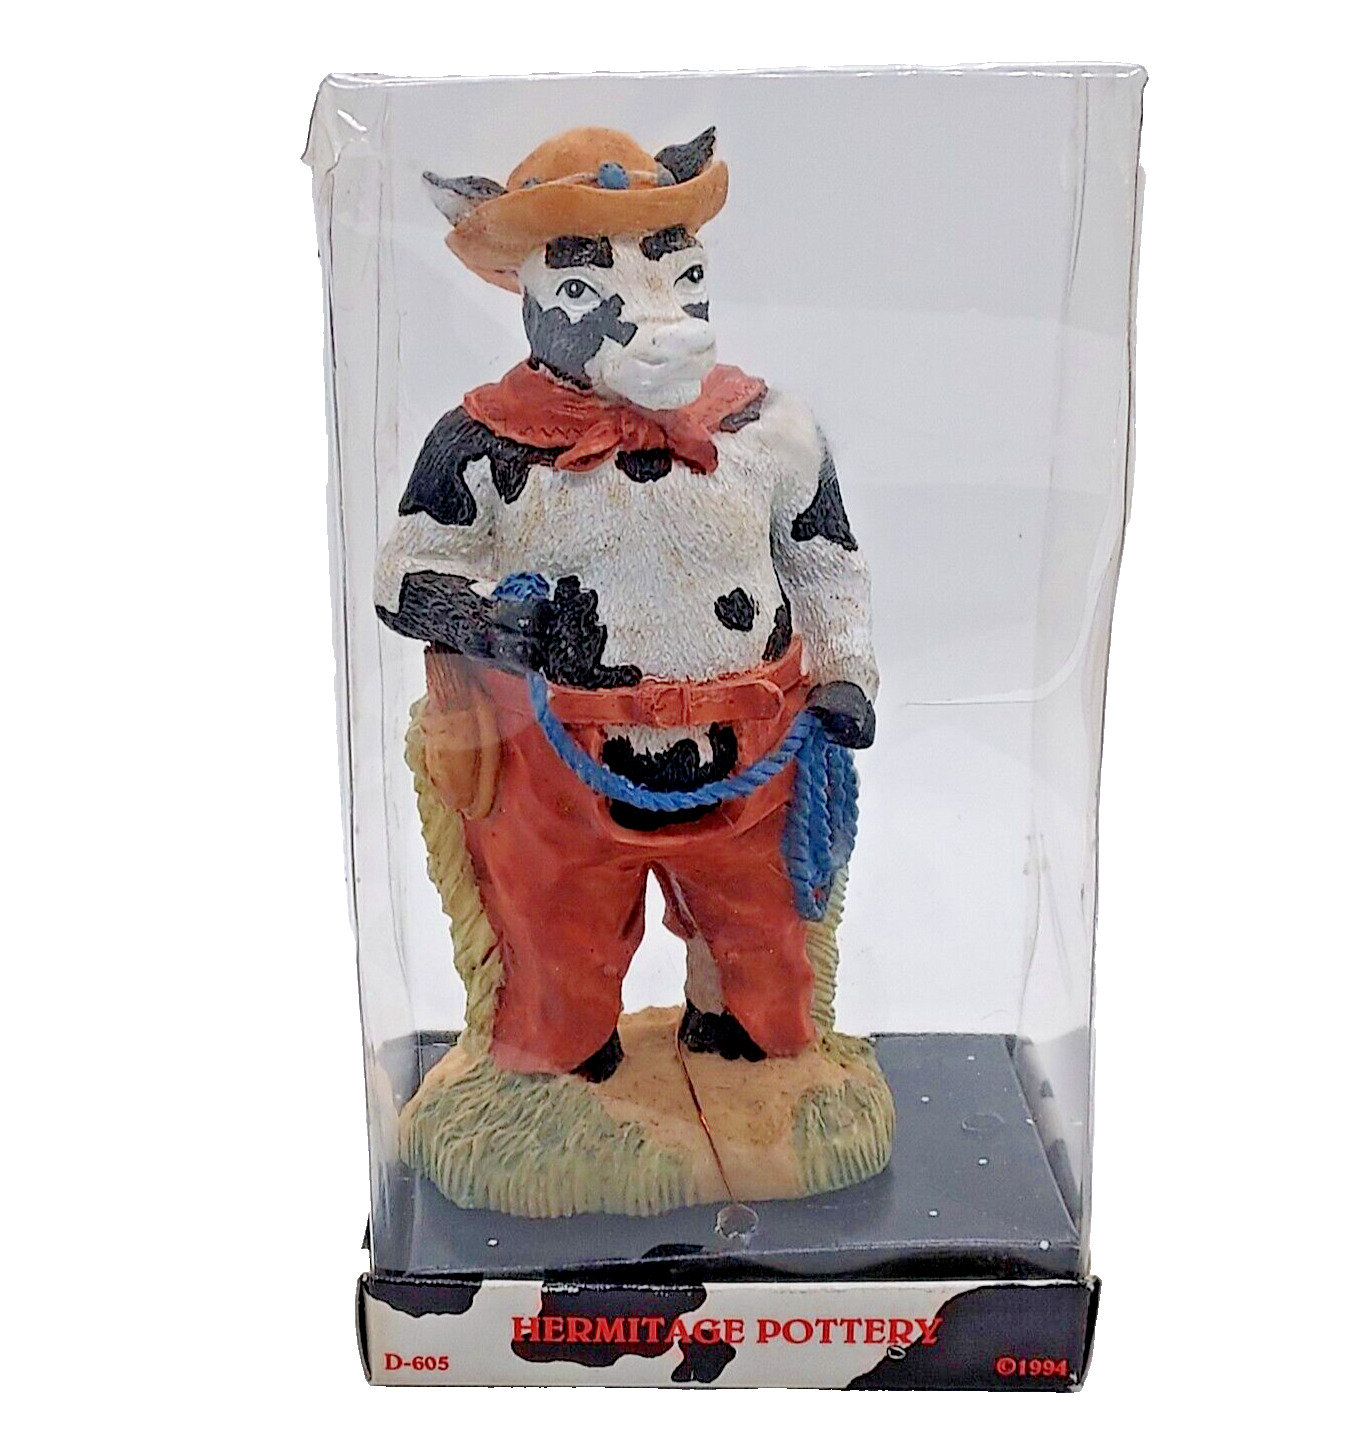 Hermitage Pottery 1994 Limited Edition Bull Figurine D-605 New In Box